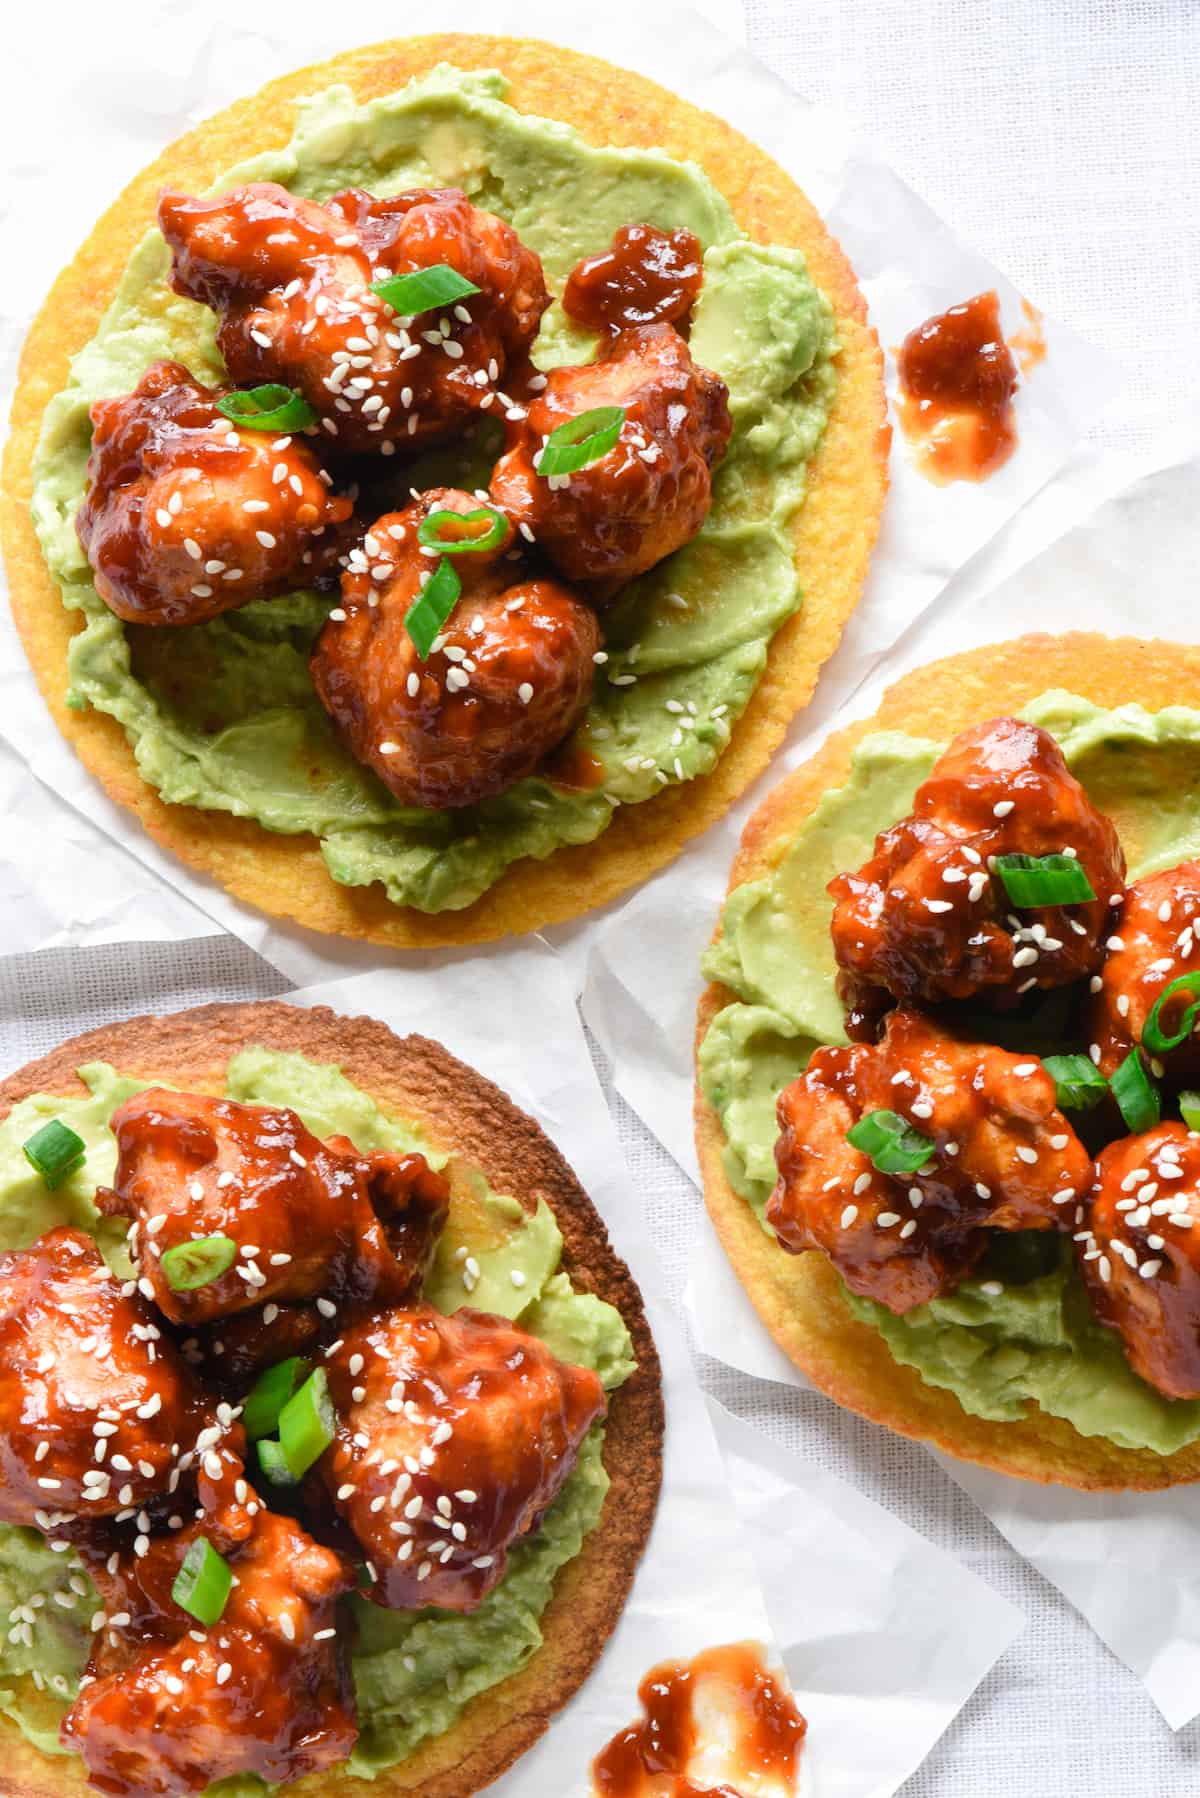 Take vegetarian tacos to a new level with these General Tso's Cauliflower Tacos. Cauliflower florets are battered, fried and tossed with an easy homemade General Tso's Sauce. Serve in tortillas with mashed avocado! | foxeslovelemons.com